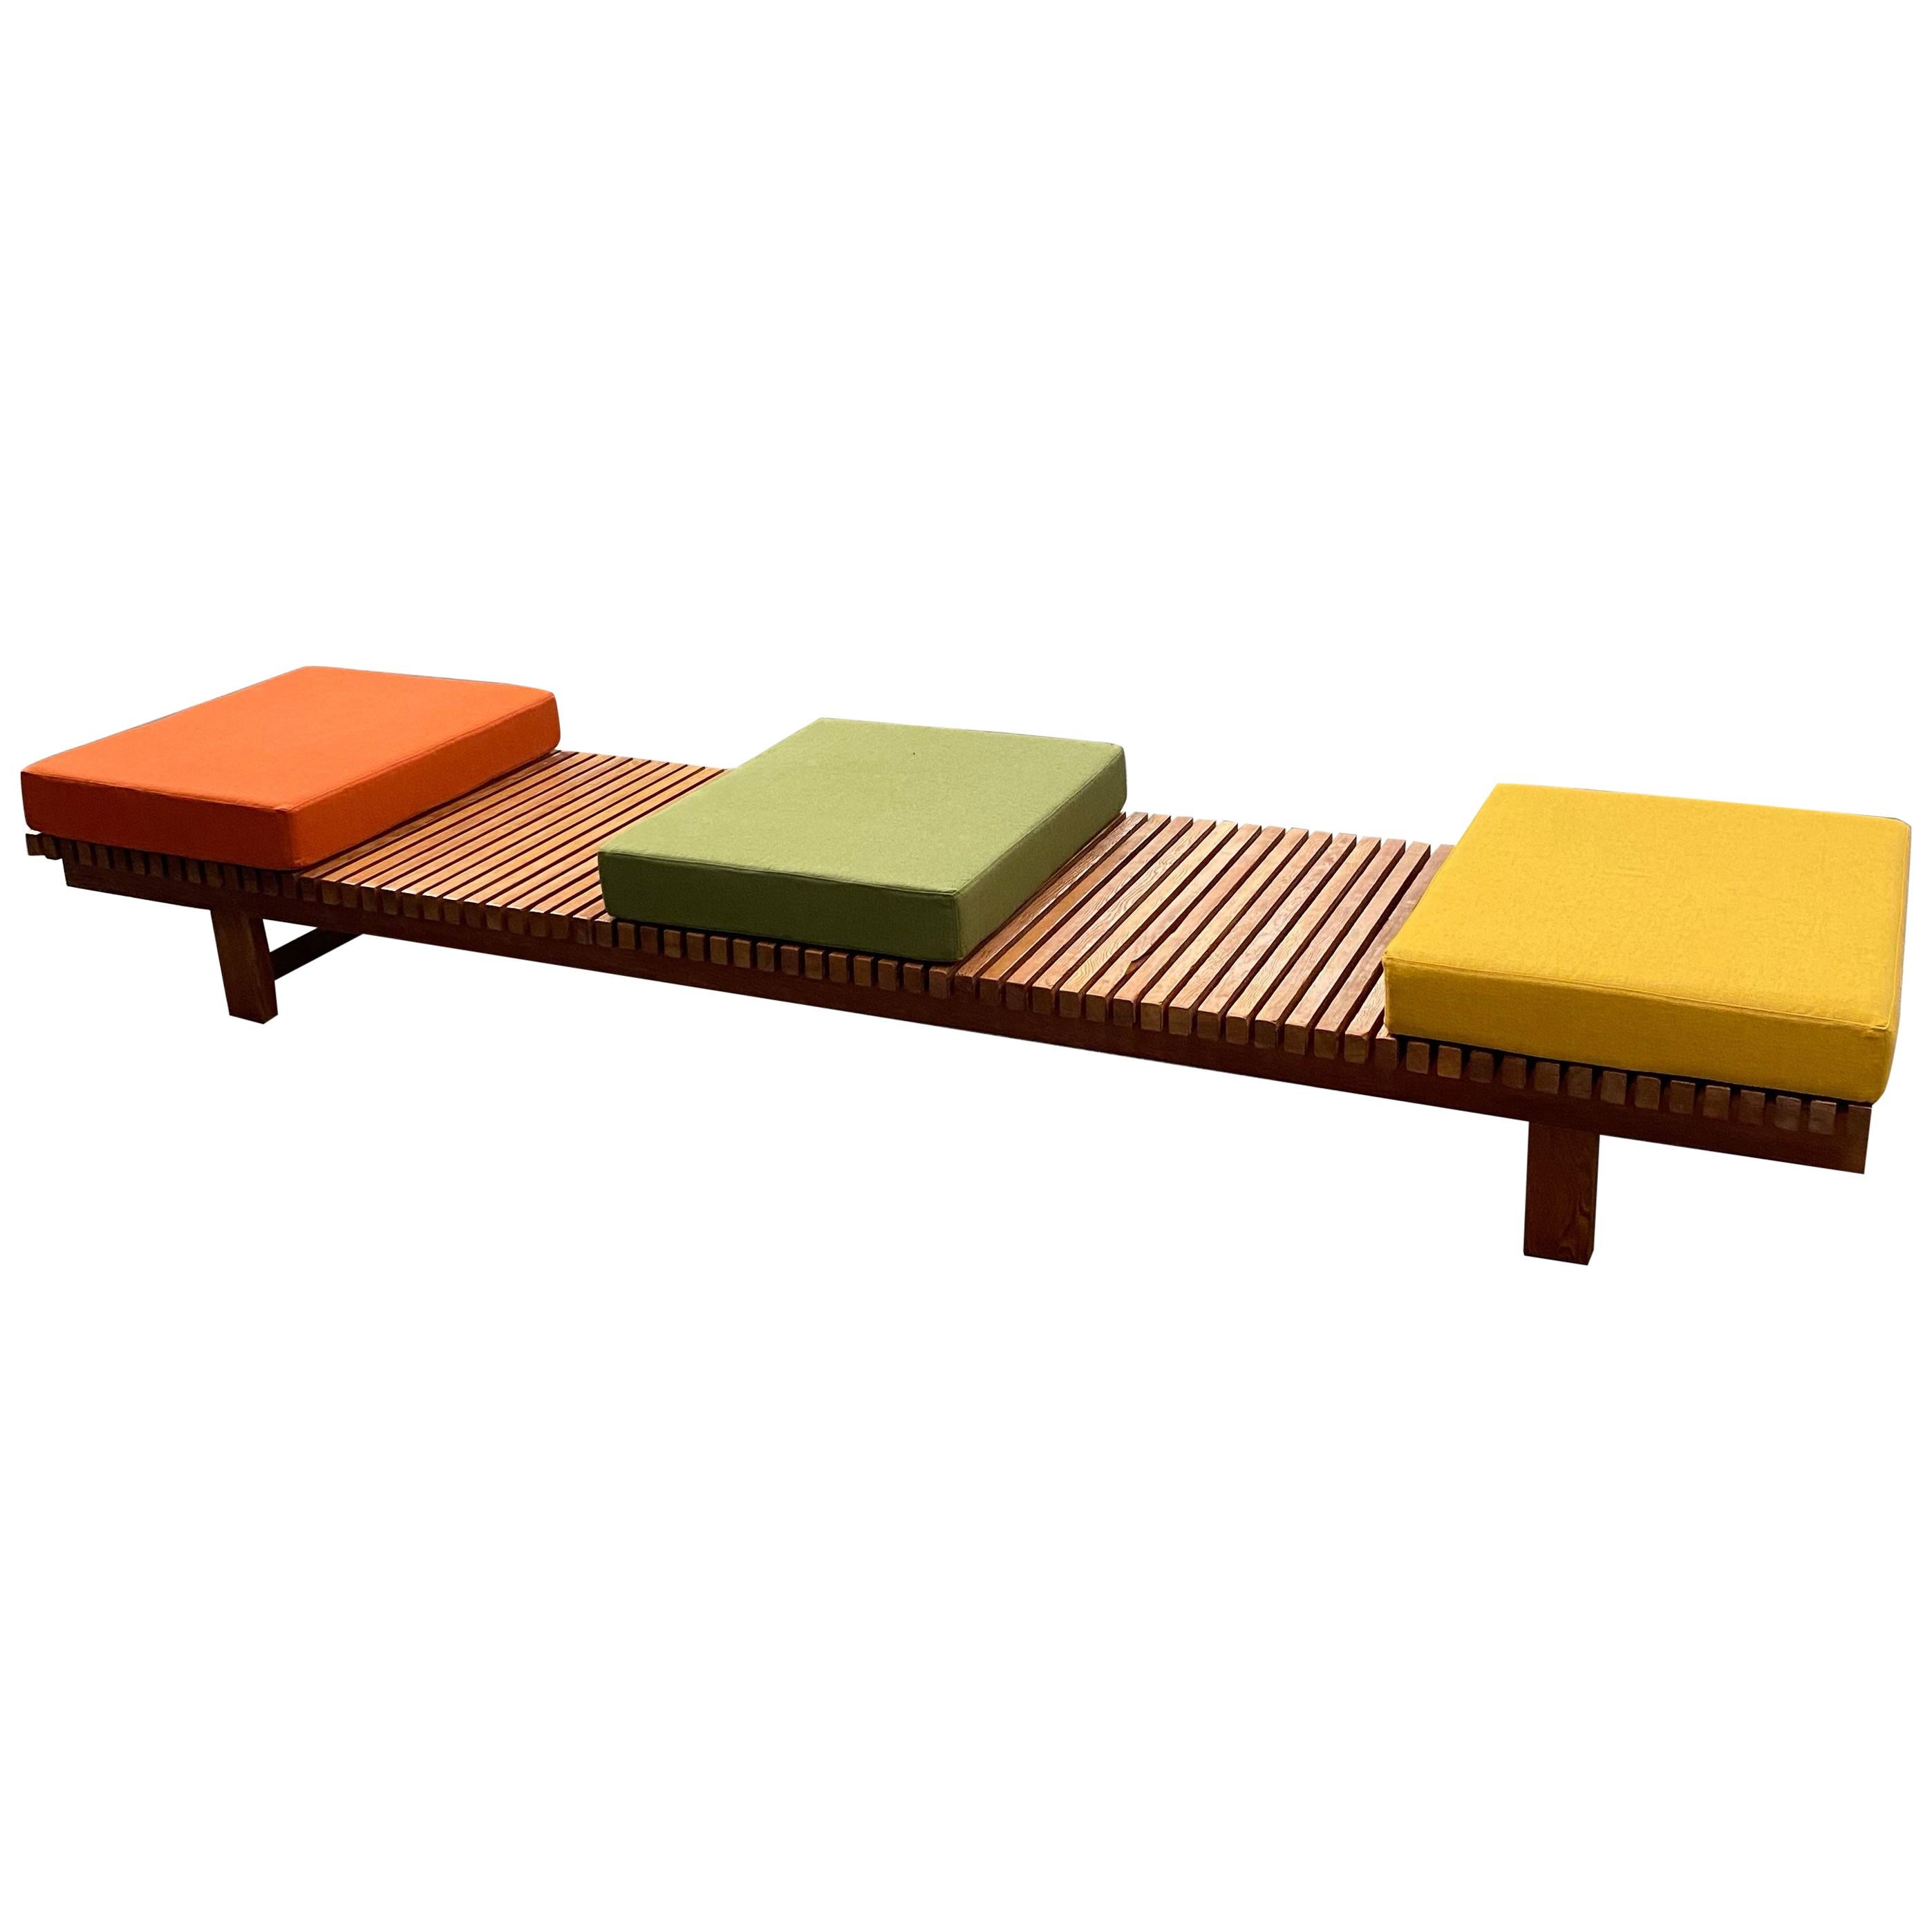 Charlotte Perriand Bench from the Arcs Ski Resort